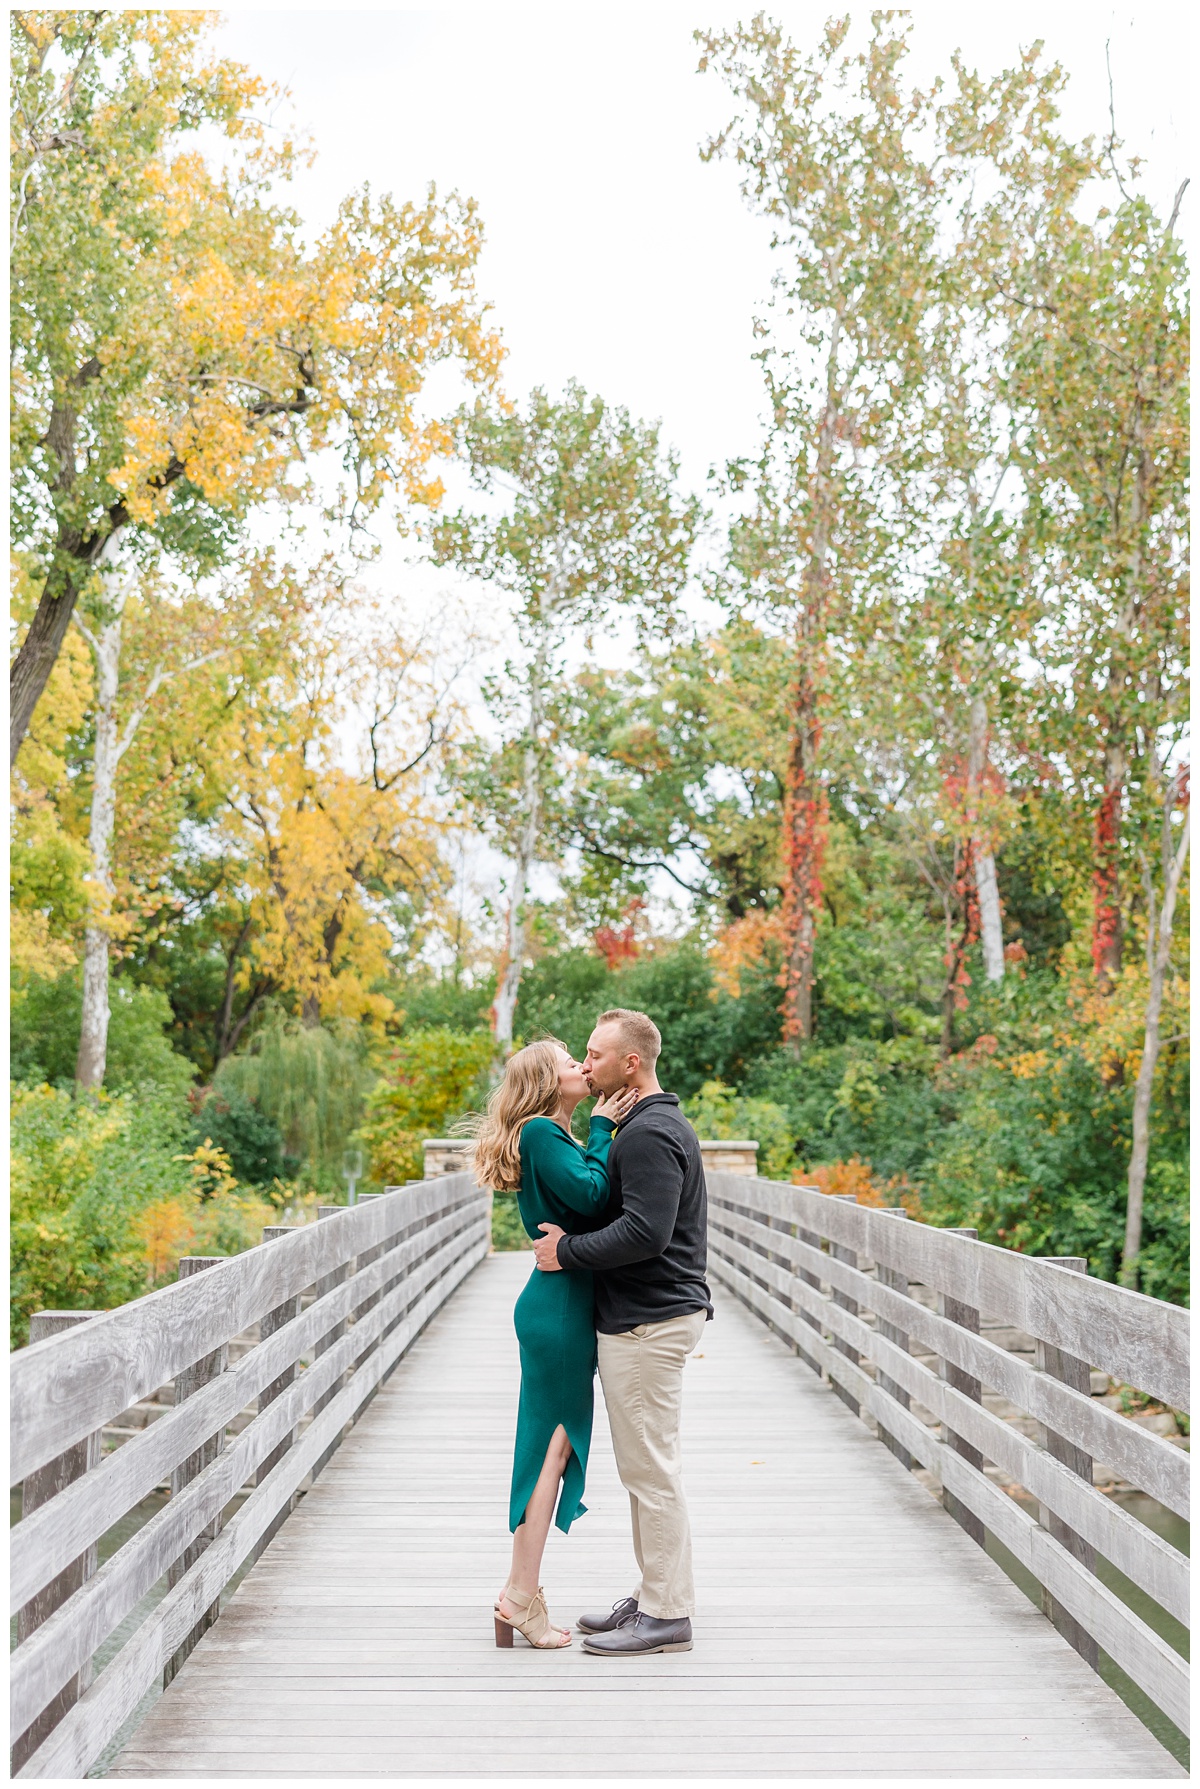 Autumn Engagement Session at Fullersburg Woods